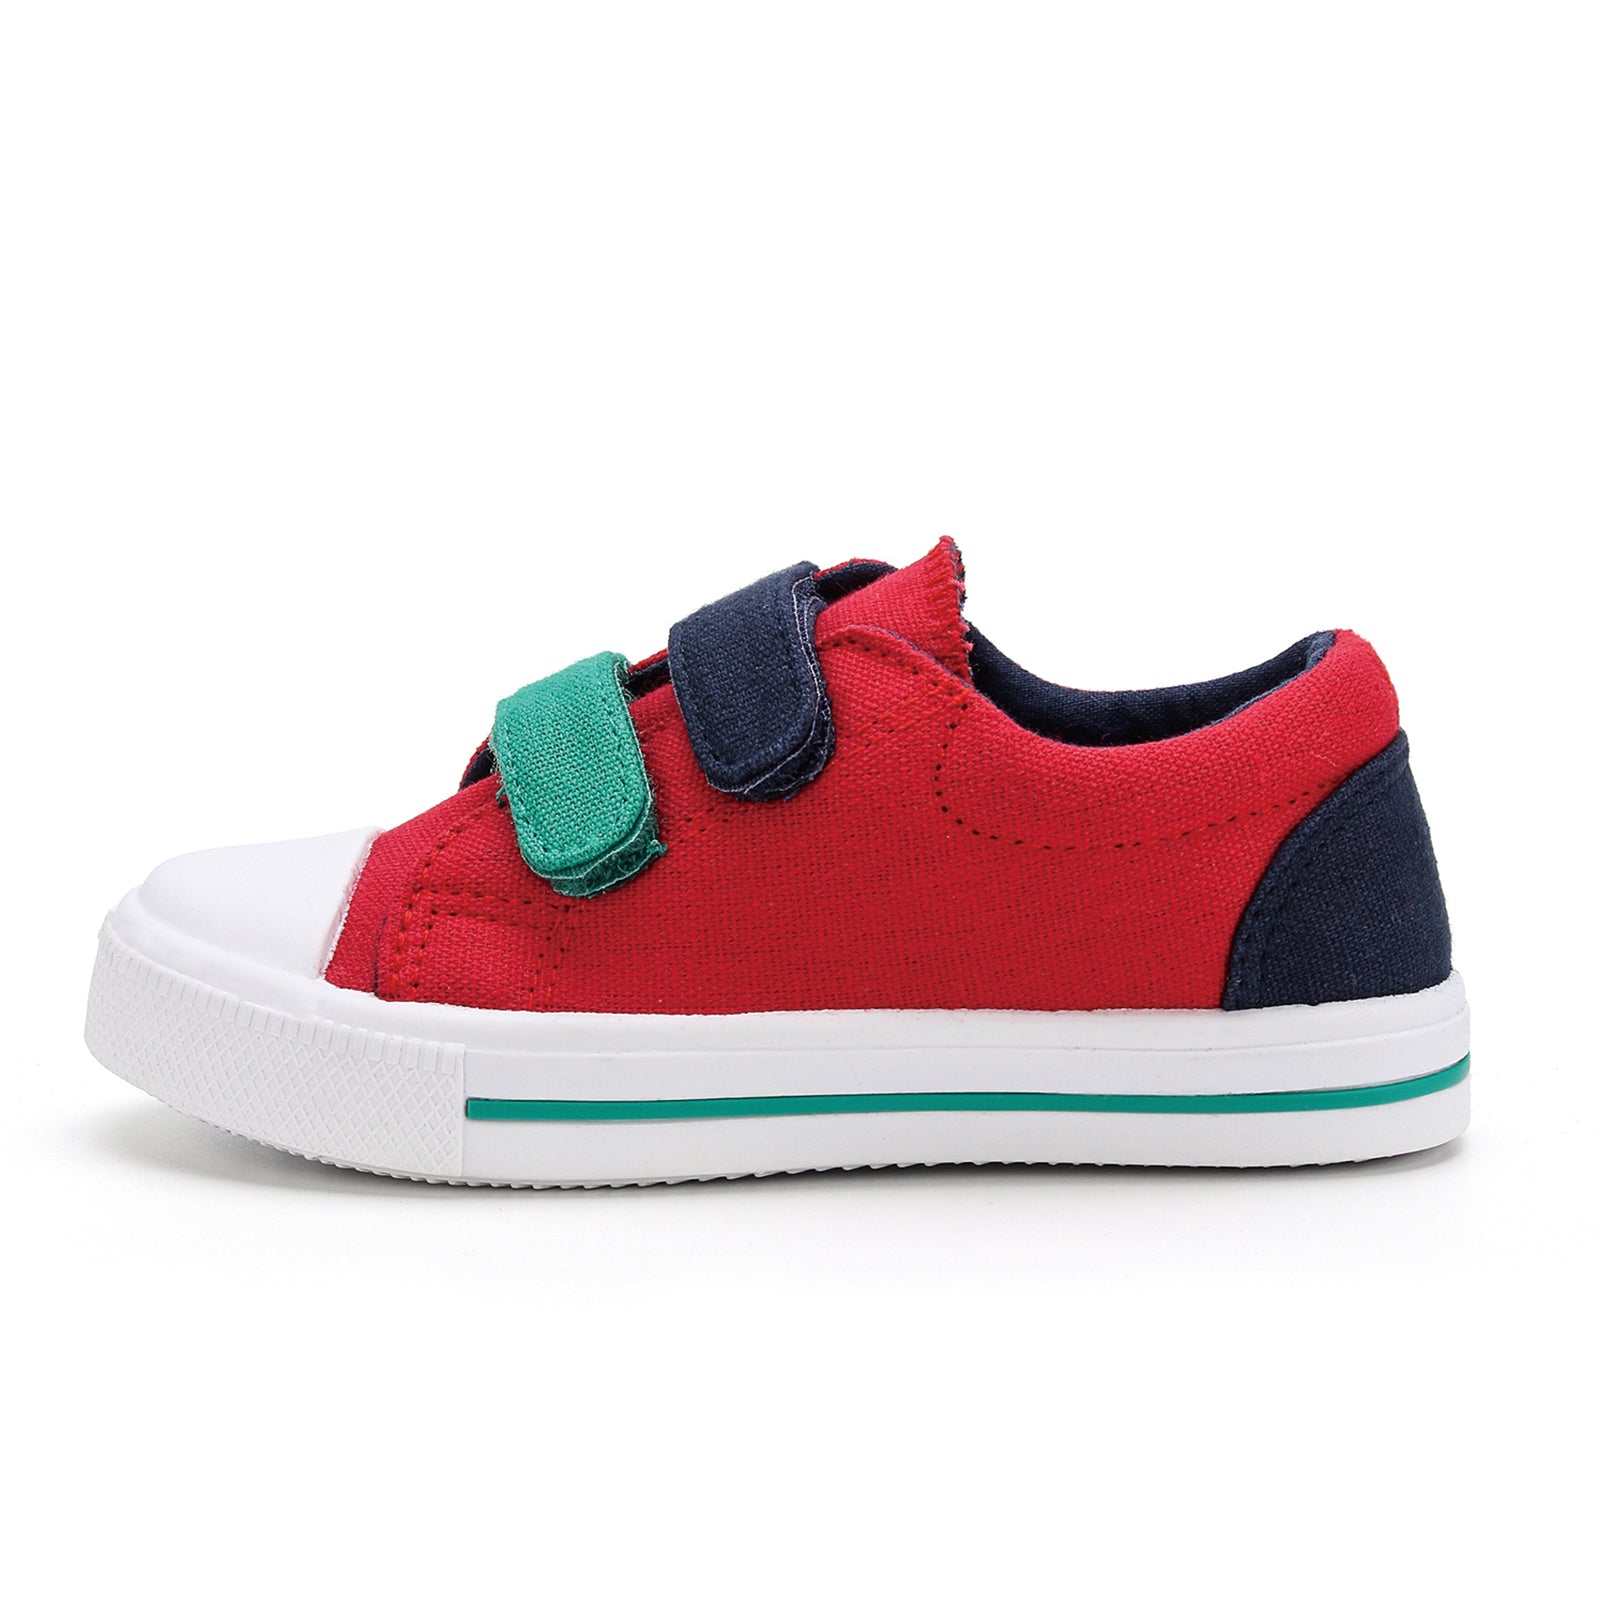 Blue and Green Velcro Red Canvas Sneakers